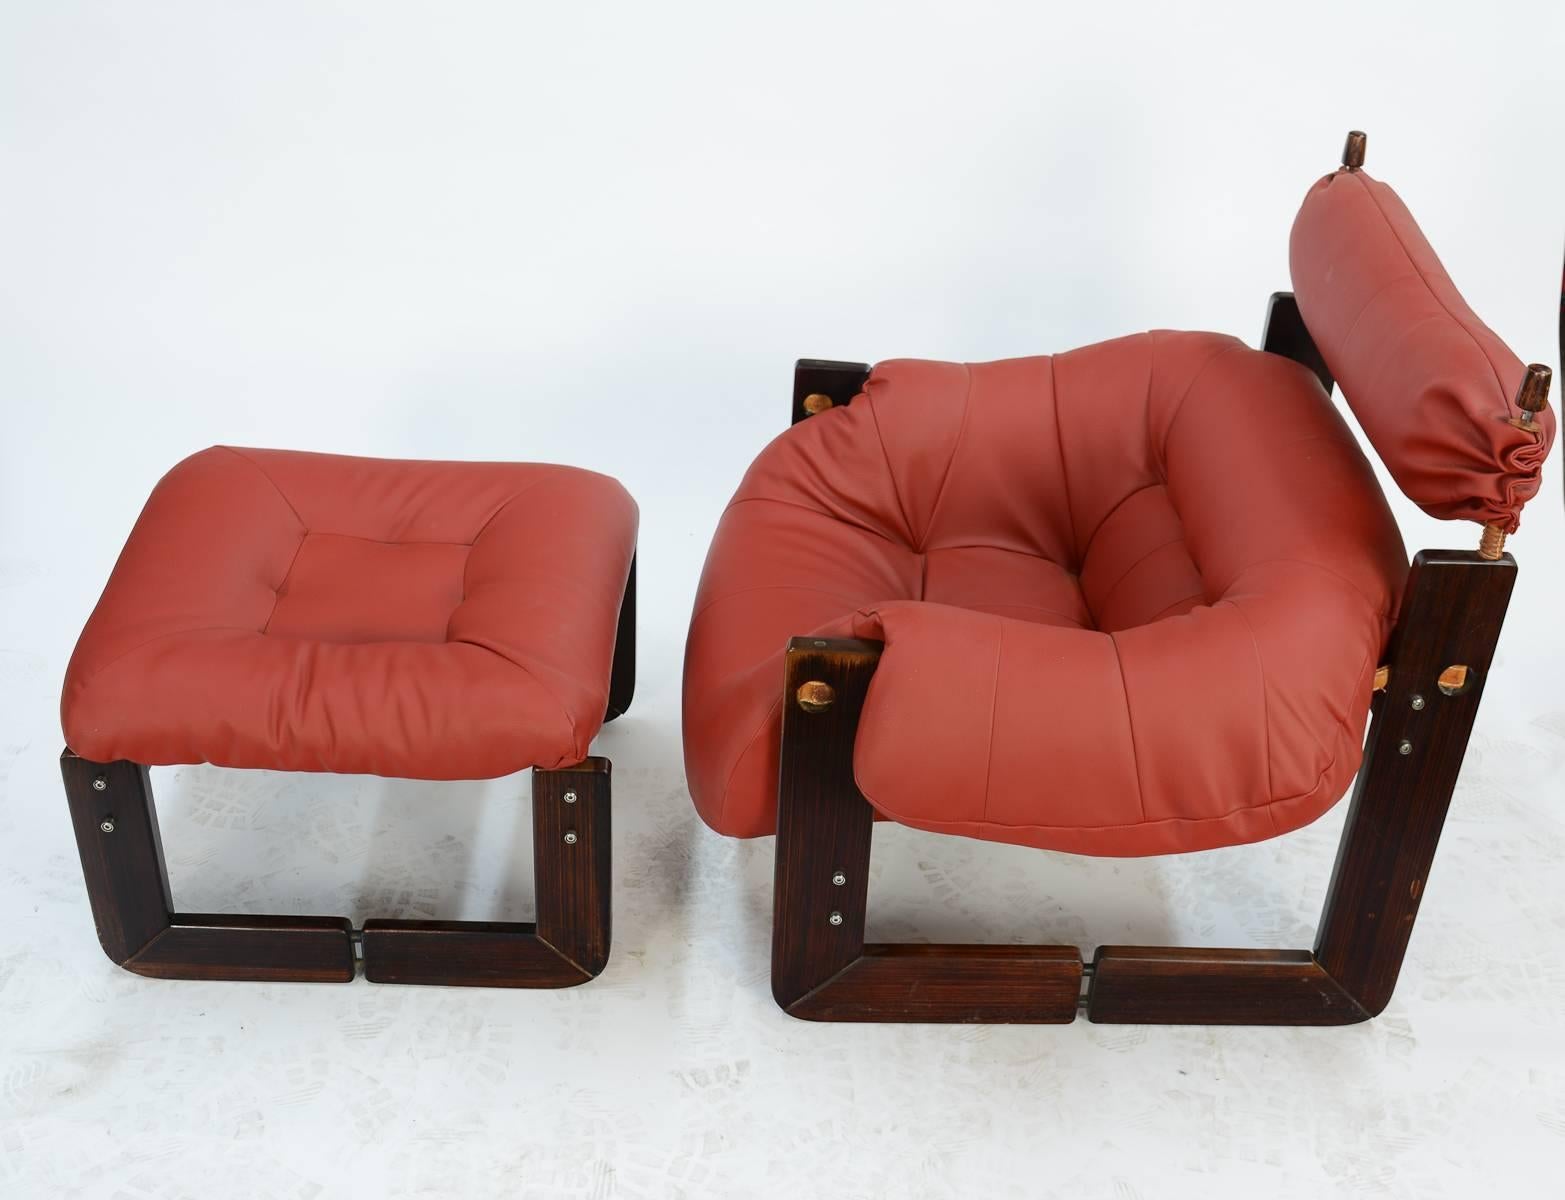 A delightfully beckoning Percival Lafer club chair and ottoman in rosewood with new red leather. Incredibly comfortable, ingenious design. Brazil, 1970s.

Ottoman measures 17 inches H x 24 inches W x 24 inches D.